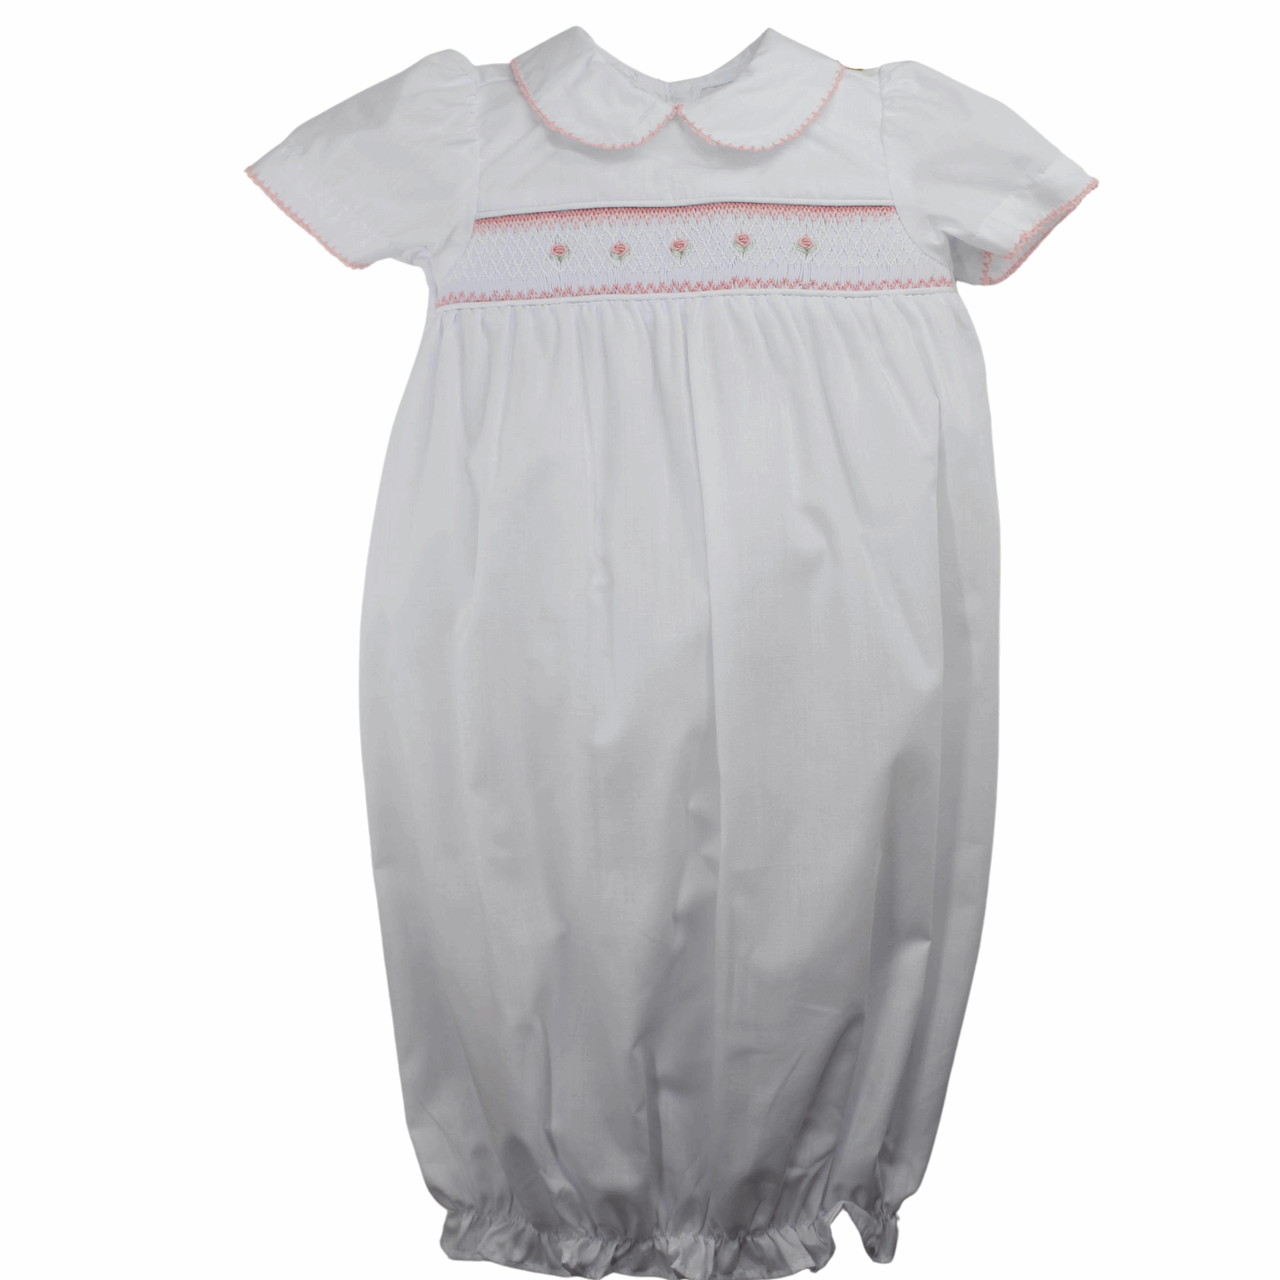 Newborn Girls Take Home Gown Dressy White Pink Smocked Sacque